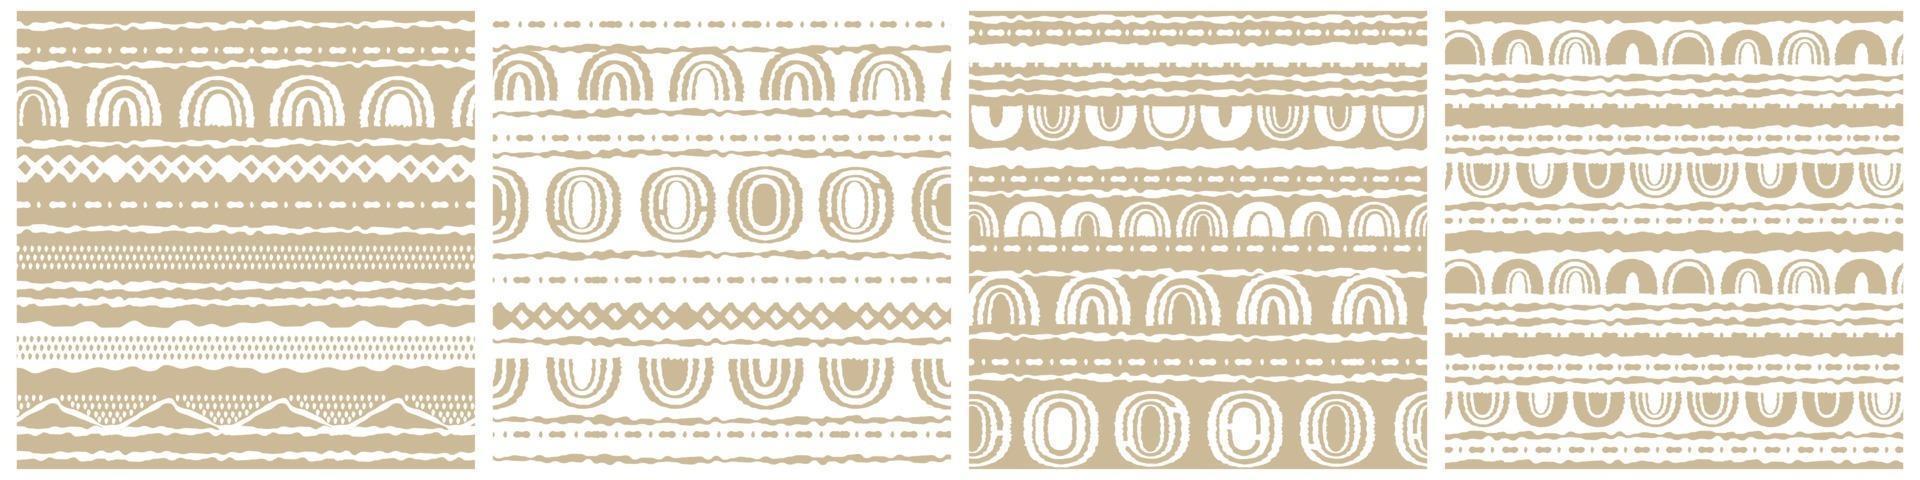 Set of four winter vector White and Beige horizontal Seamless border repeat patterns with random rough, twisted part of triangles or broken lines, part of circles shapes, rainbows. Hand drawn effect